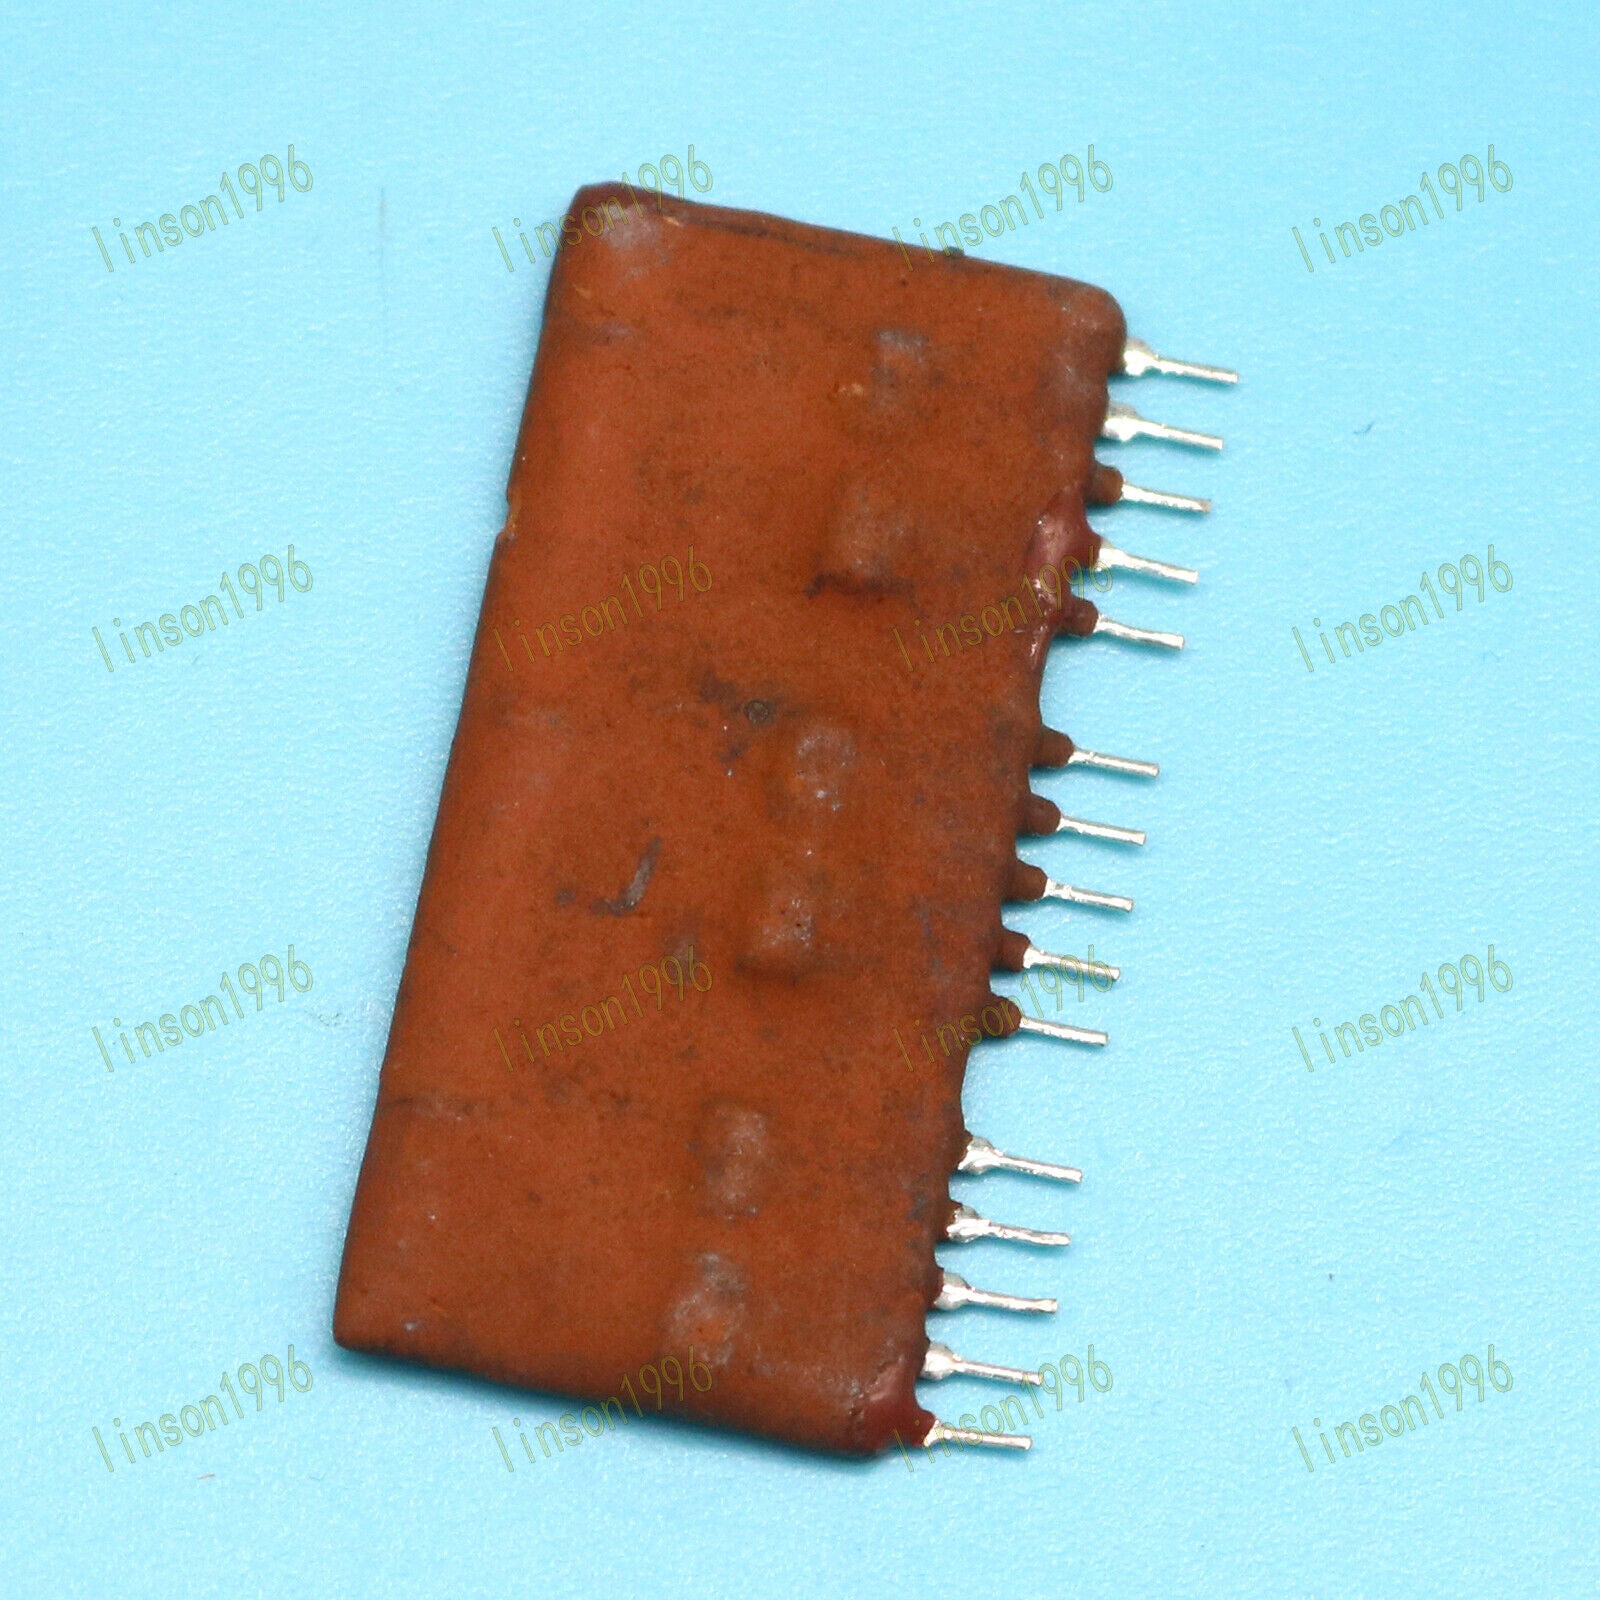 used  For Fuji IC Chips Replacement EXB359 Tested Good Condition